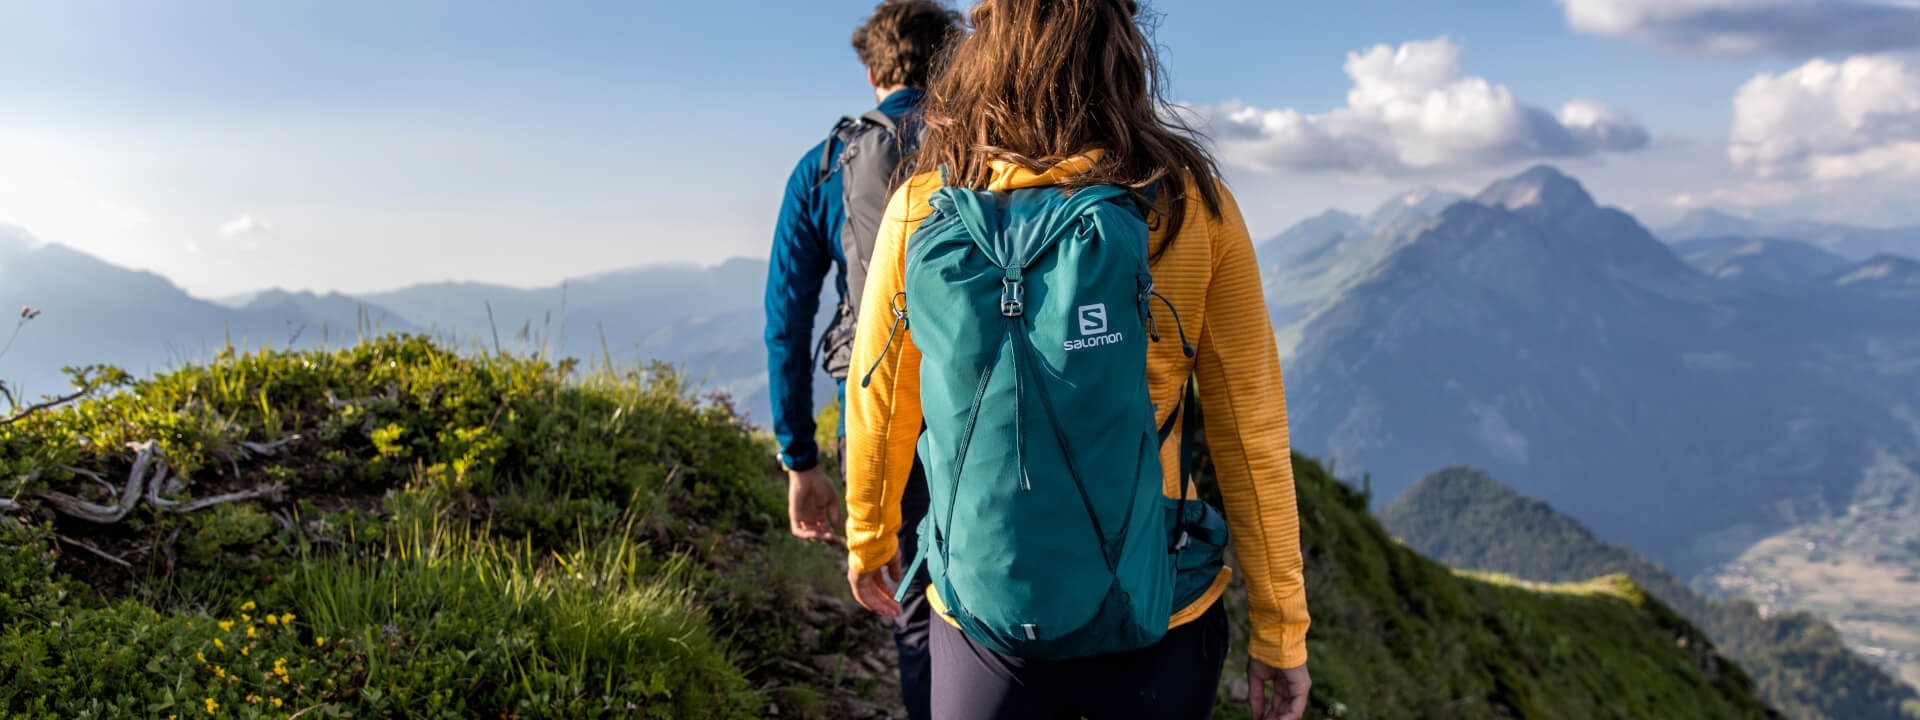 HOW TO CHOOSE YOUR HIKING BACKPACK